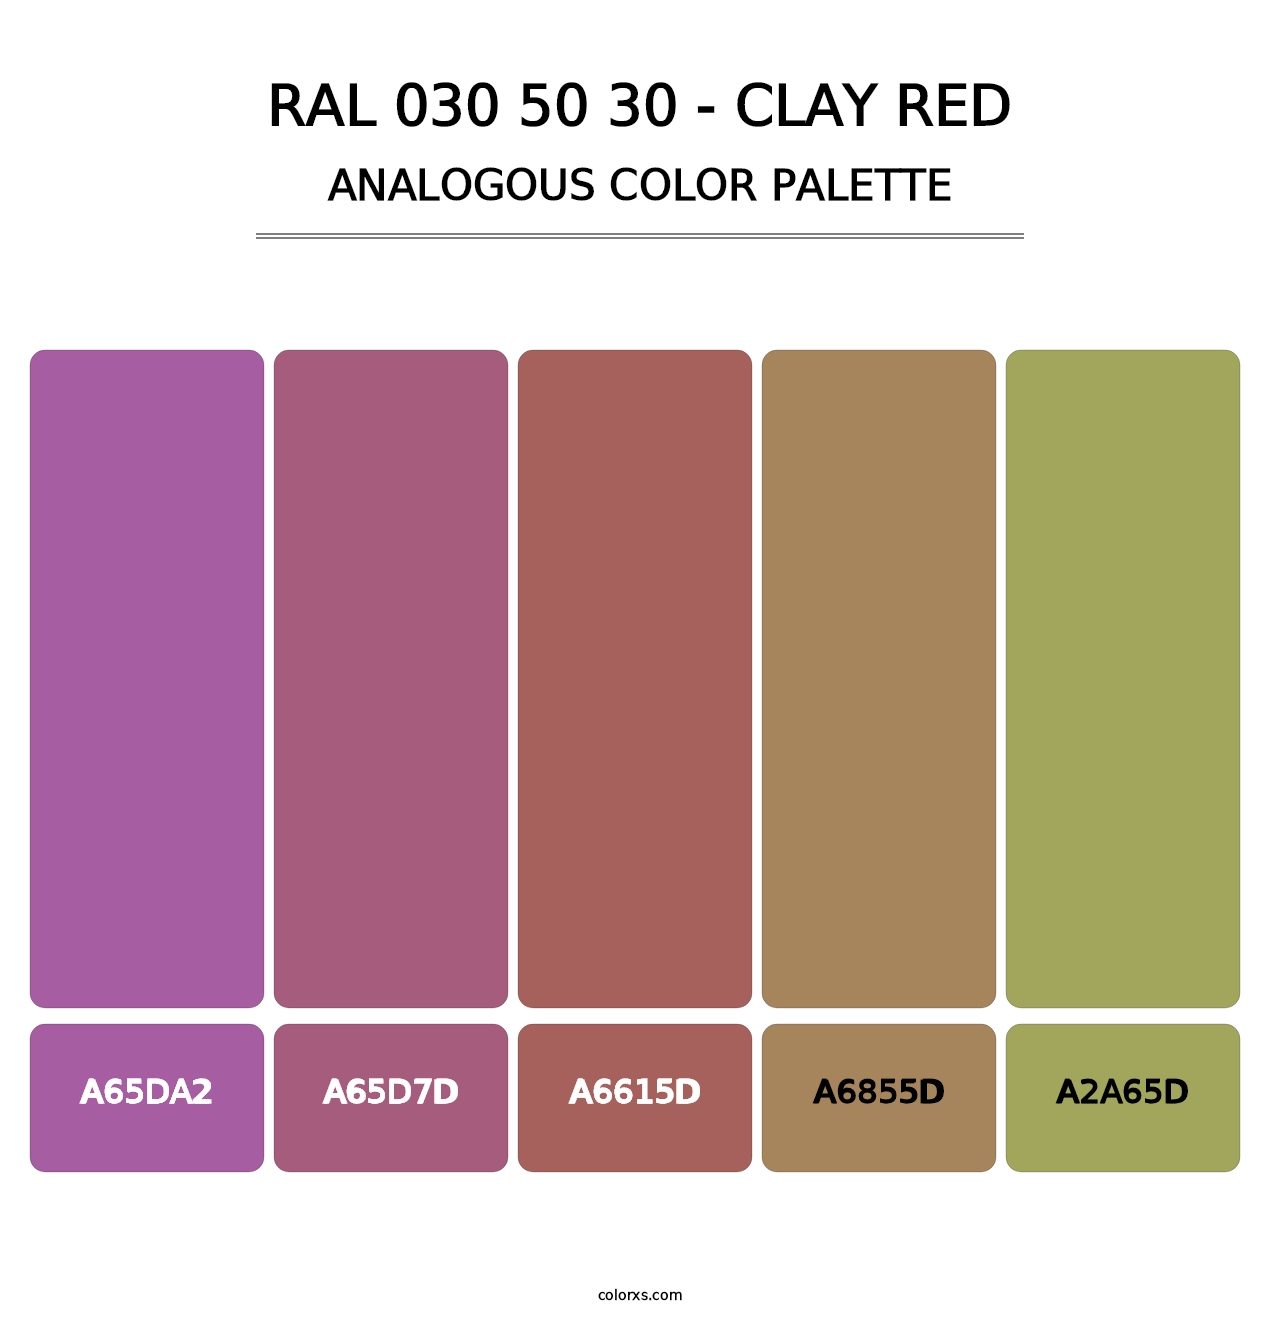 RAL 030 50 30 - Clay Red - Analogous Color Palette